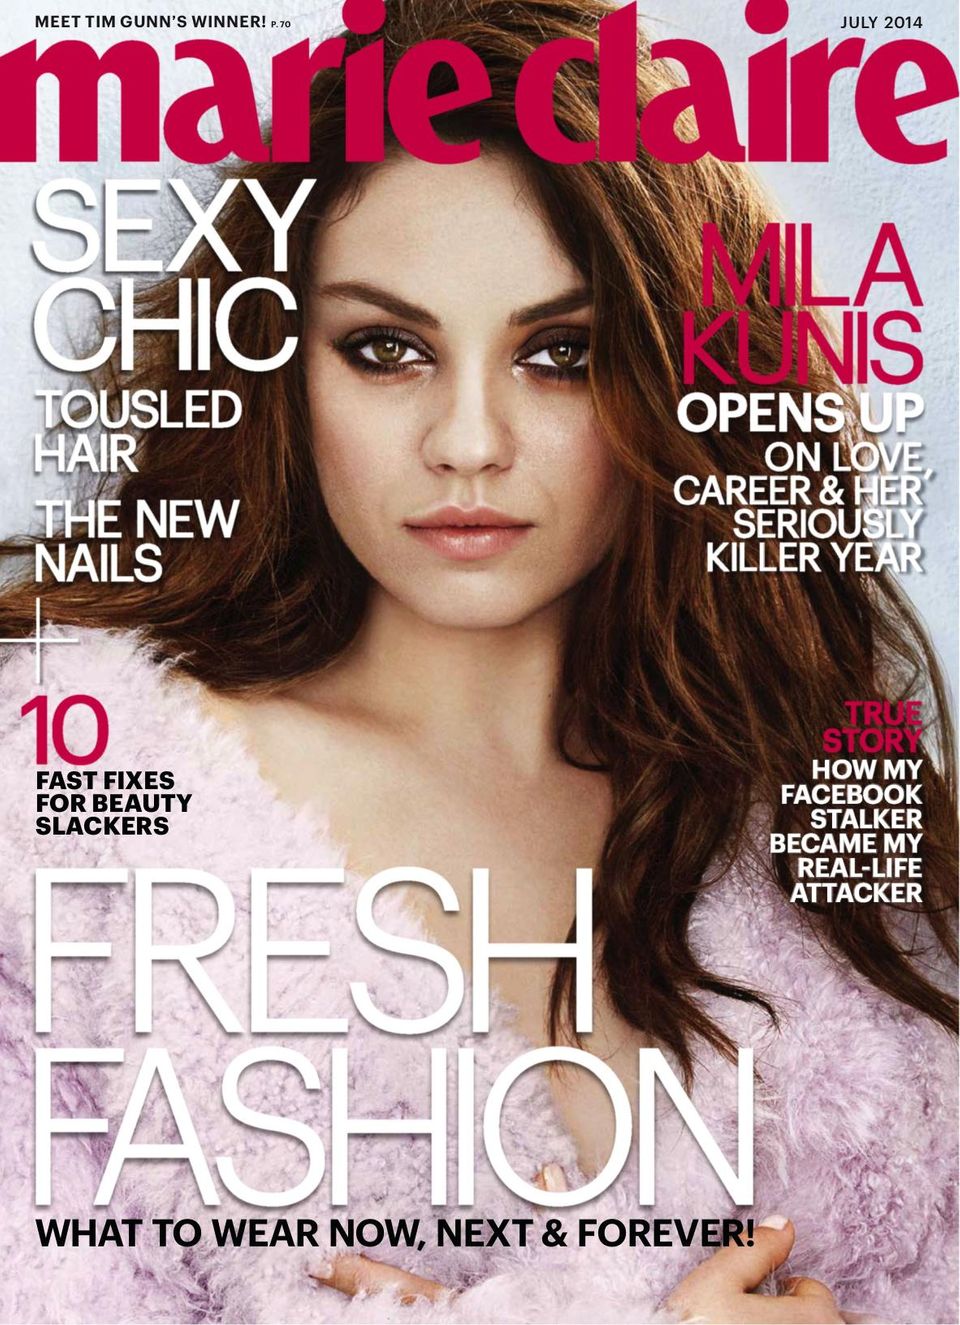 Marie Claire UK to close print magazine after 31 years of publication, The  Independent